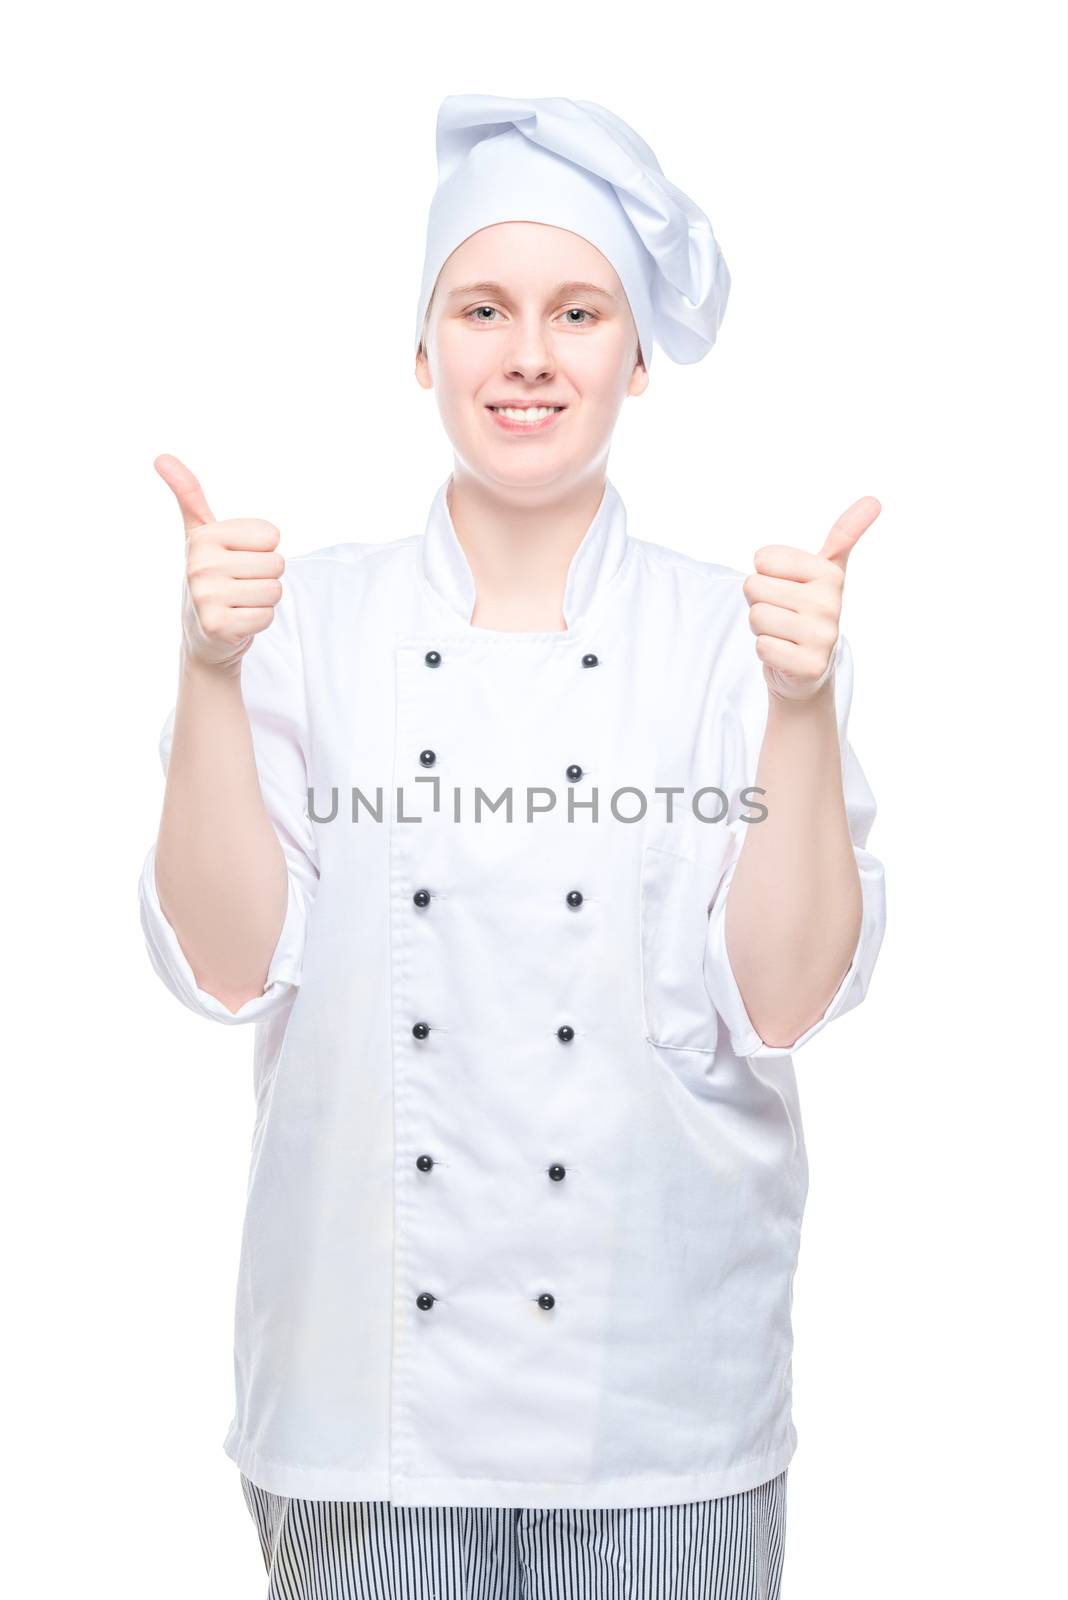 chef shows gesture class hands shooting on white background